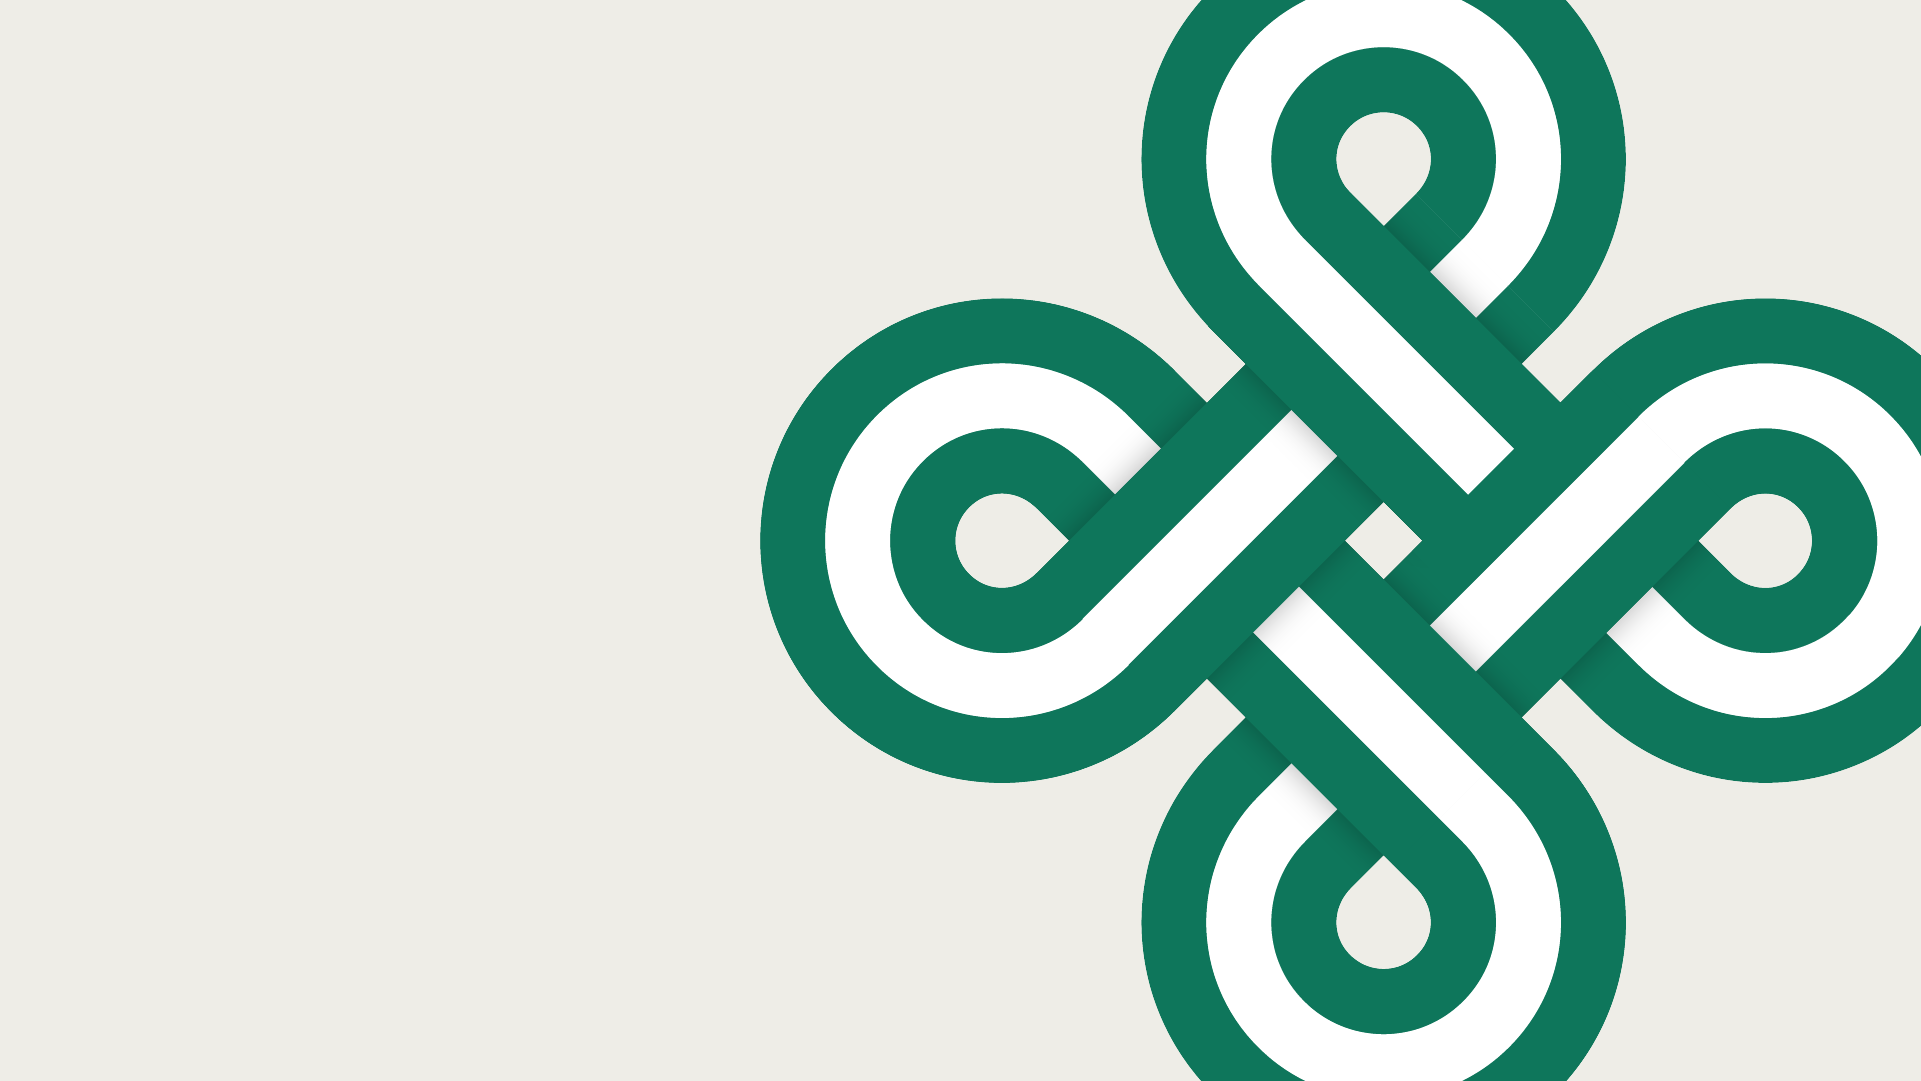 Clickable graphic for St. Patrick's Day parade guide. A swirl of green, resembling a clover.